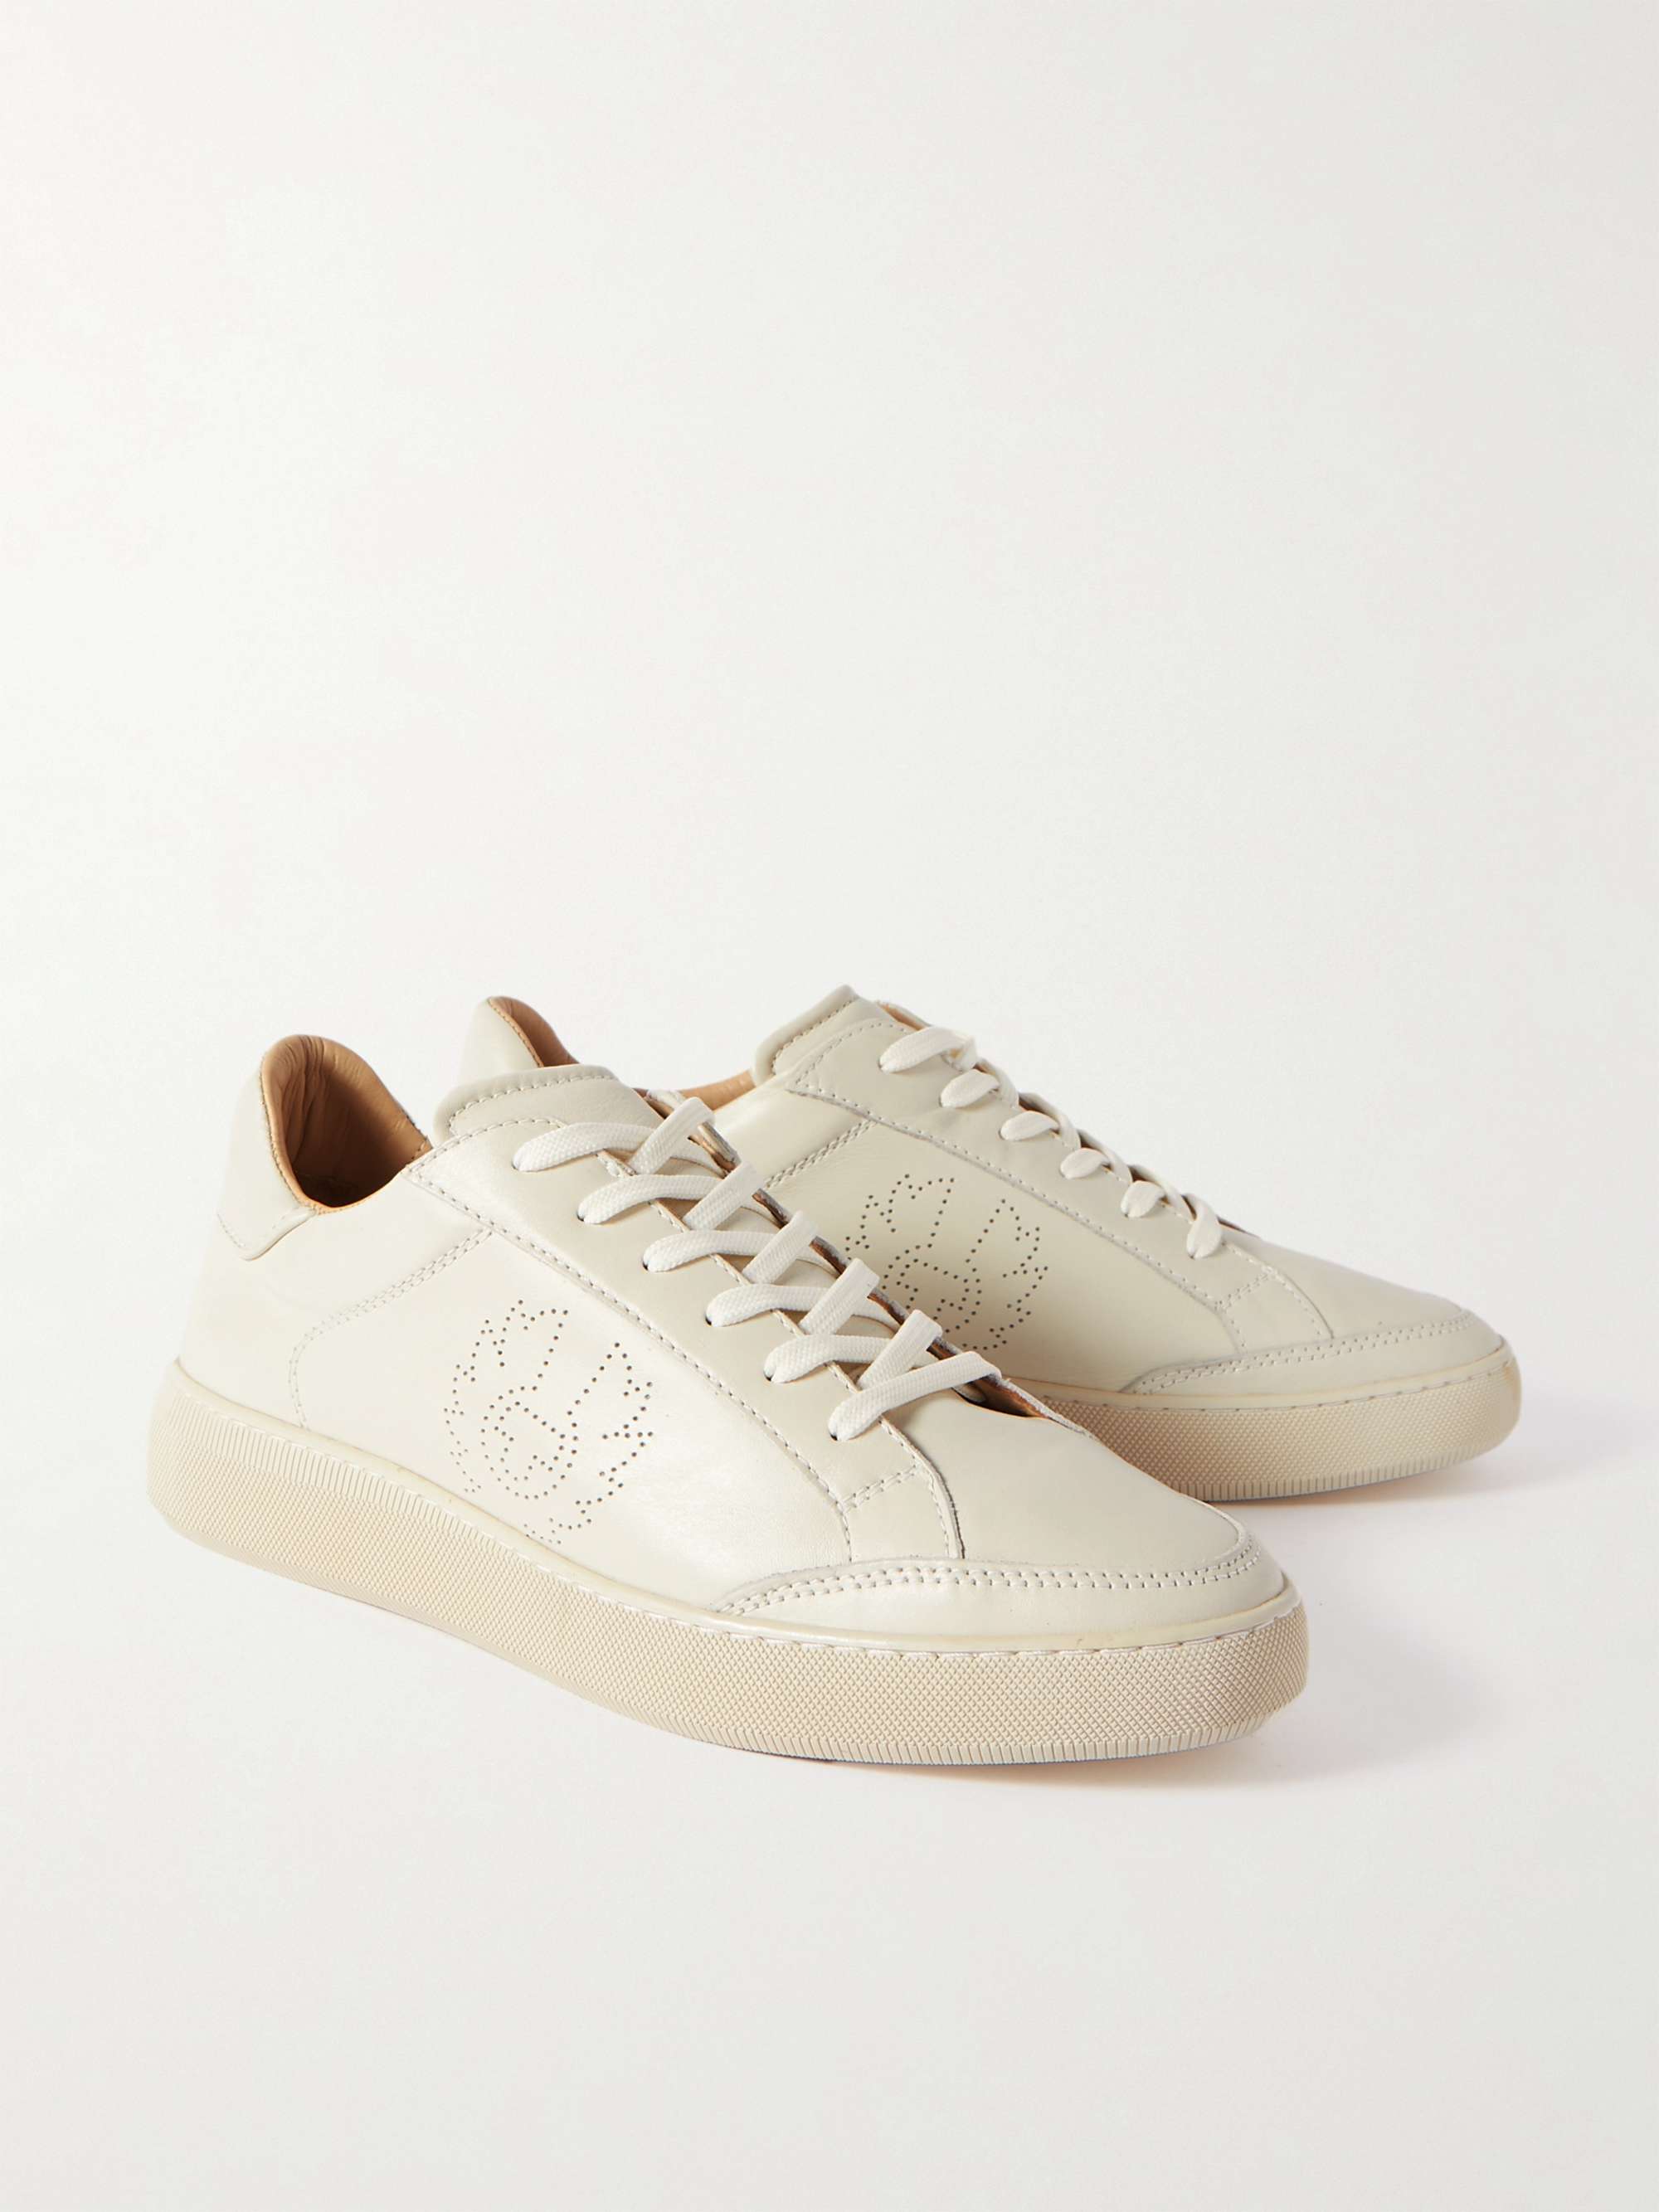 Off-white Track Logo-Perforated Leather Sneakers | BELSTAFF | MR PORTER